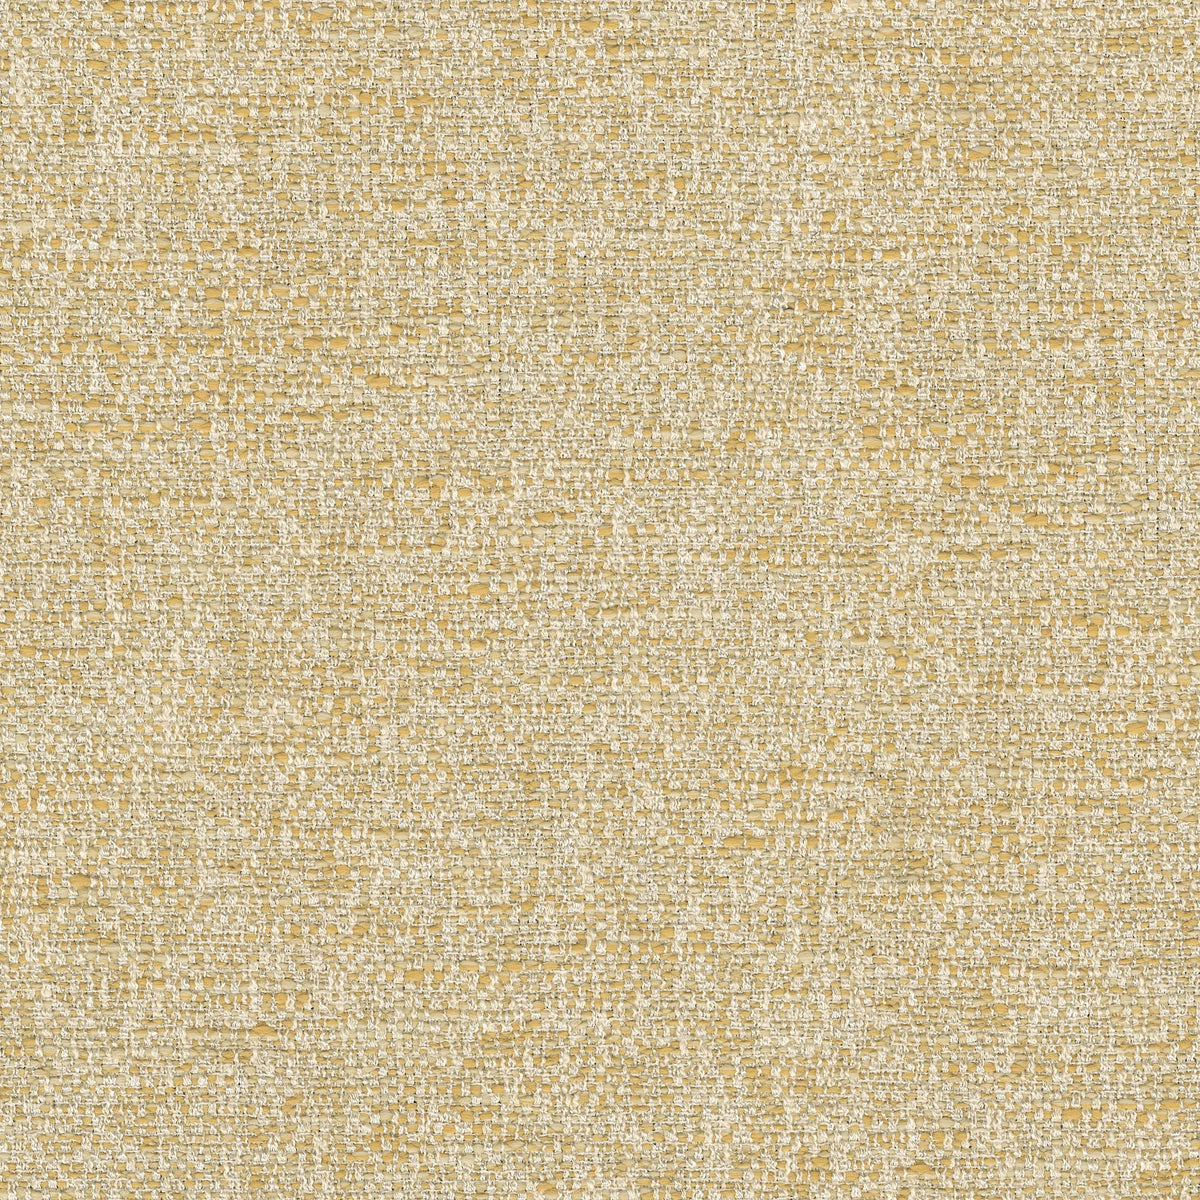 P/K Lifestyles Windham - Gold 470932 Upholstery Fabric